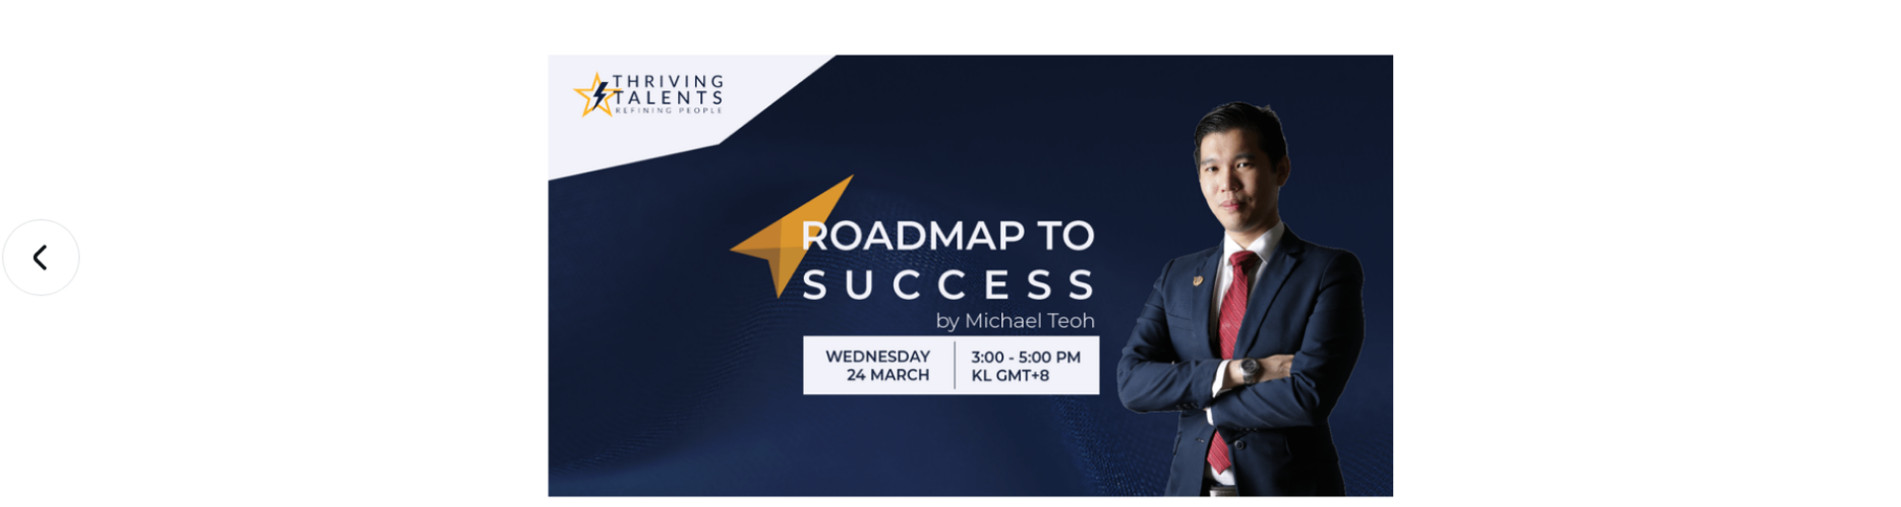 FREE Webinar —ROADMAP TO SUCCESS: How to Build & Sustain High-Performance Teams 